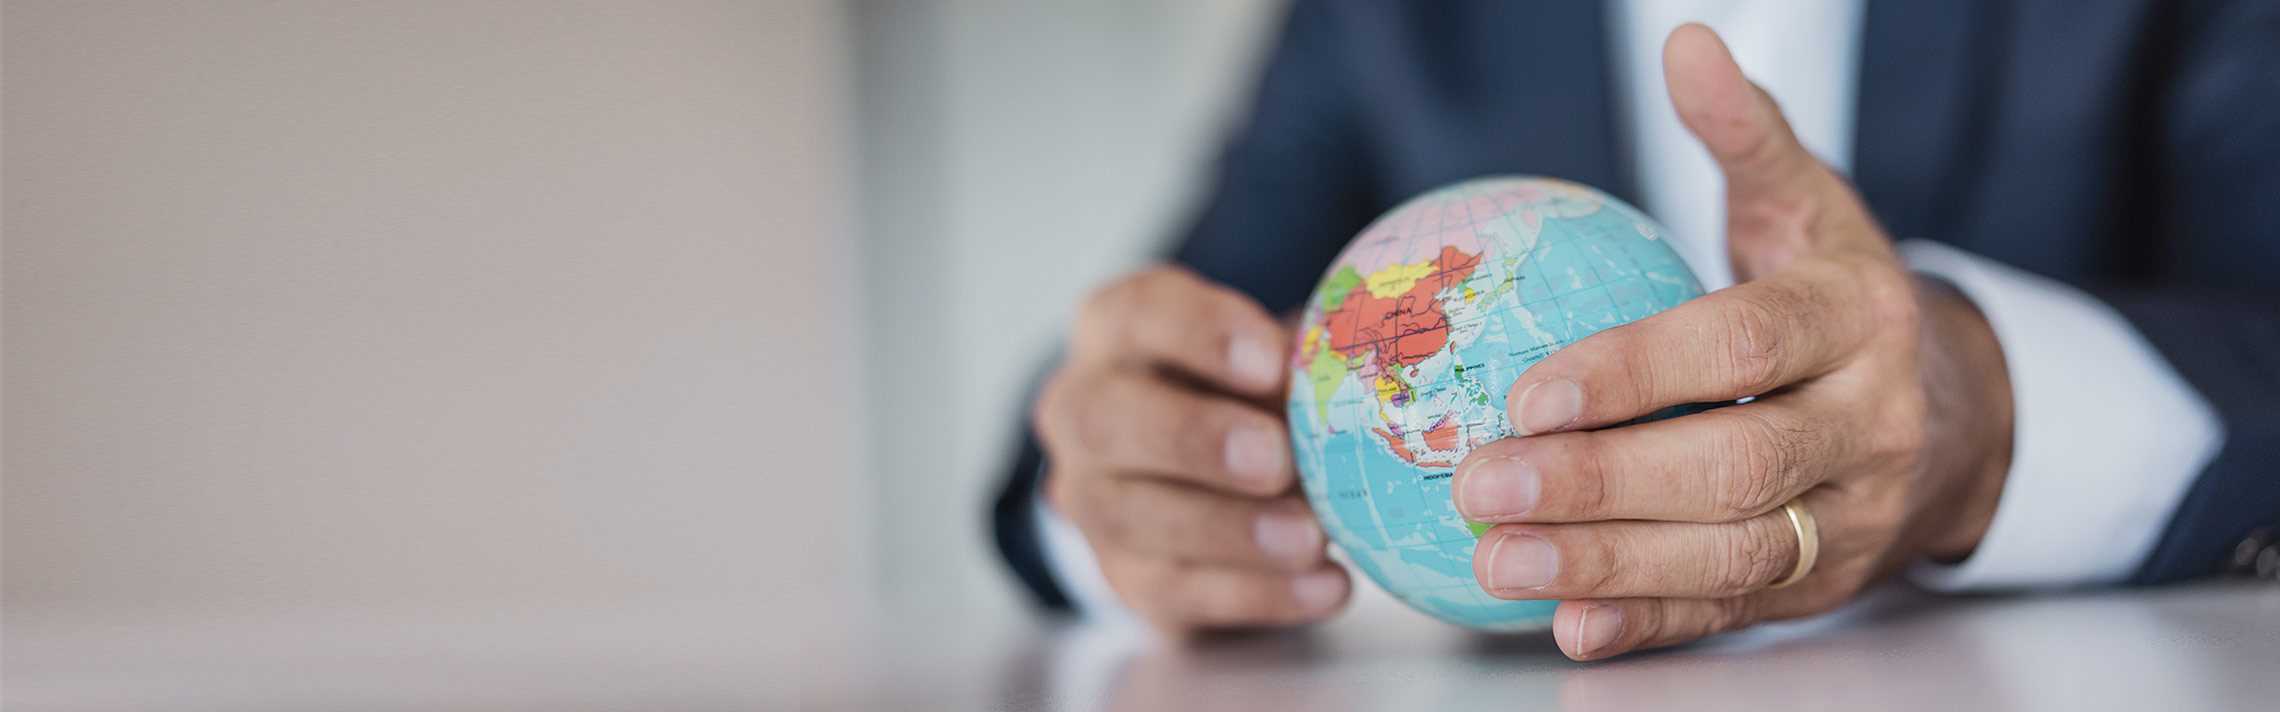 A pair of hands holding a small globe